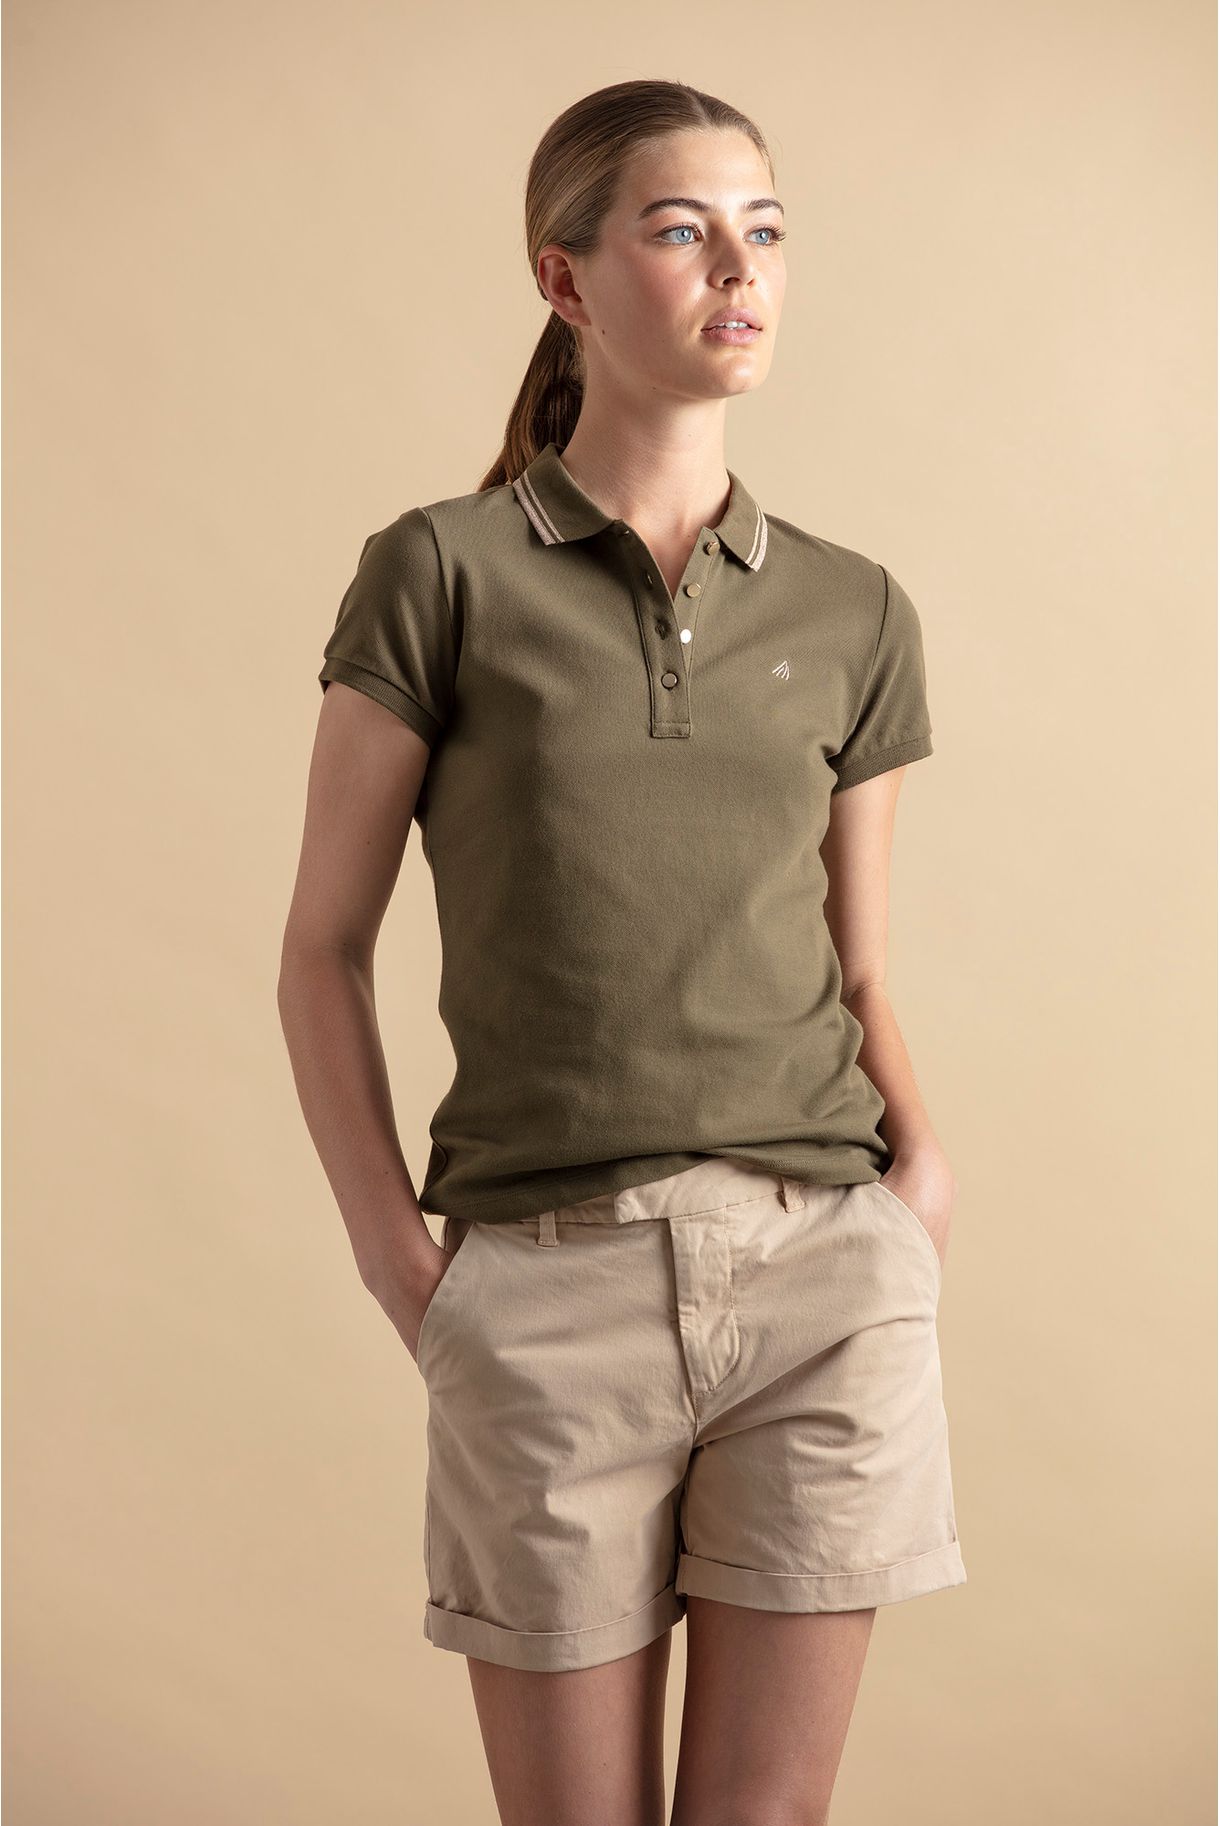 Polo shirt with gold buttons